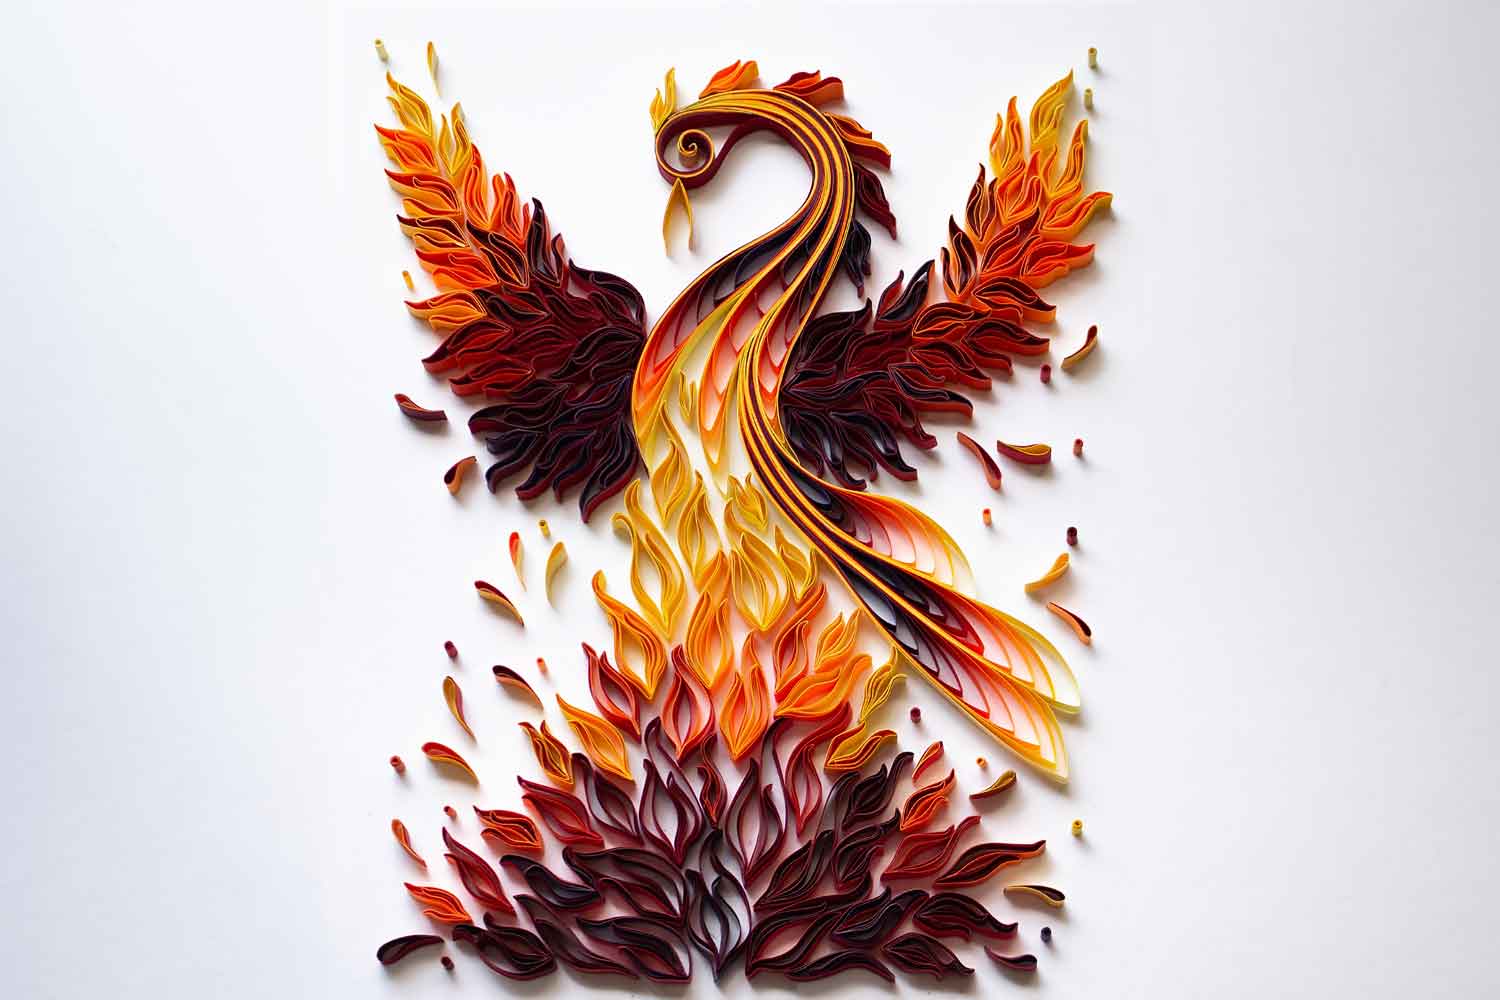 The Second Quilled Phoenix: A Fiery Masterpiece